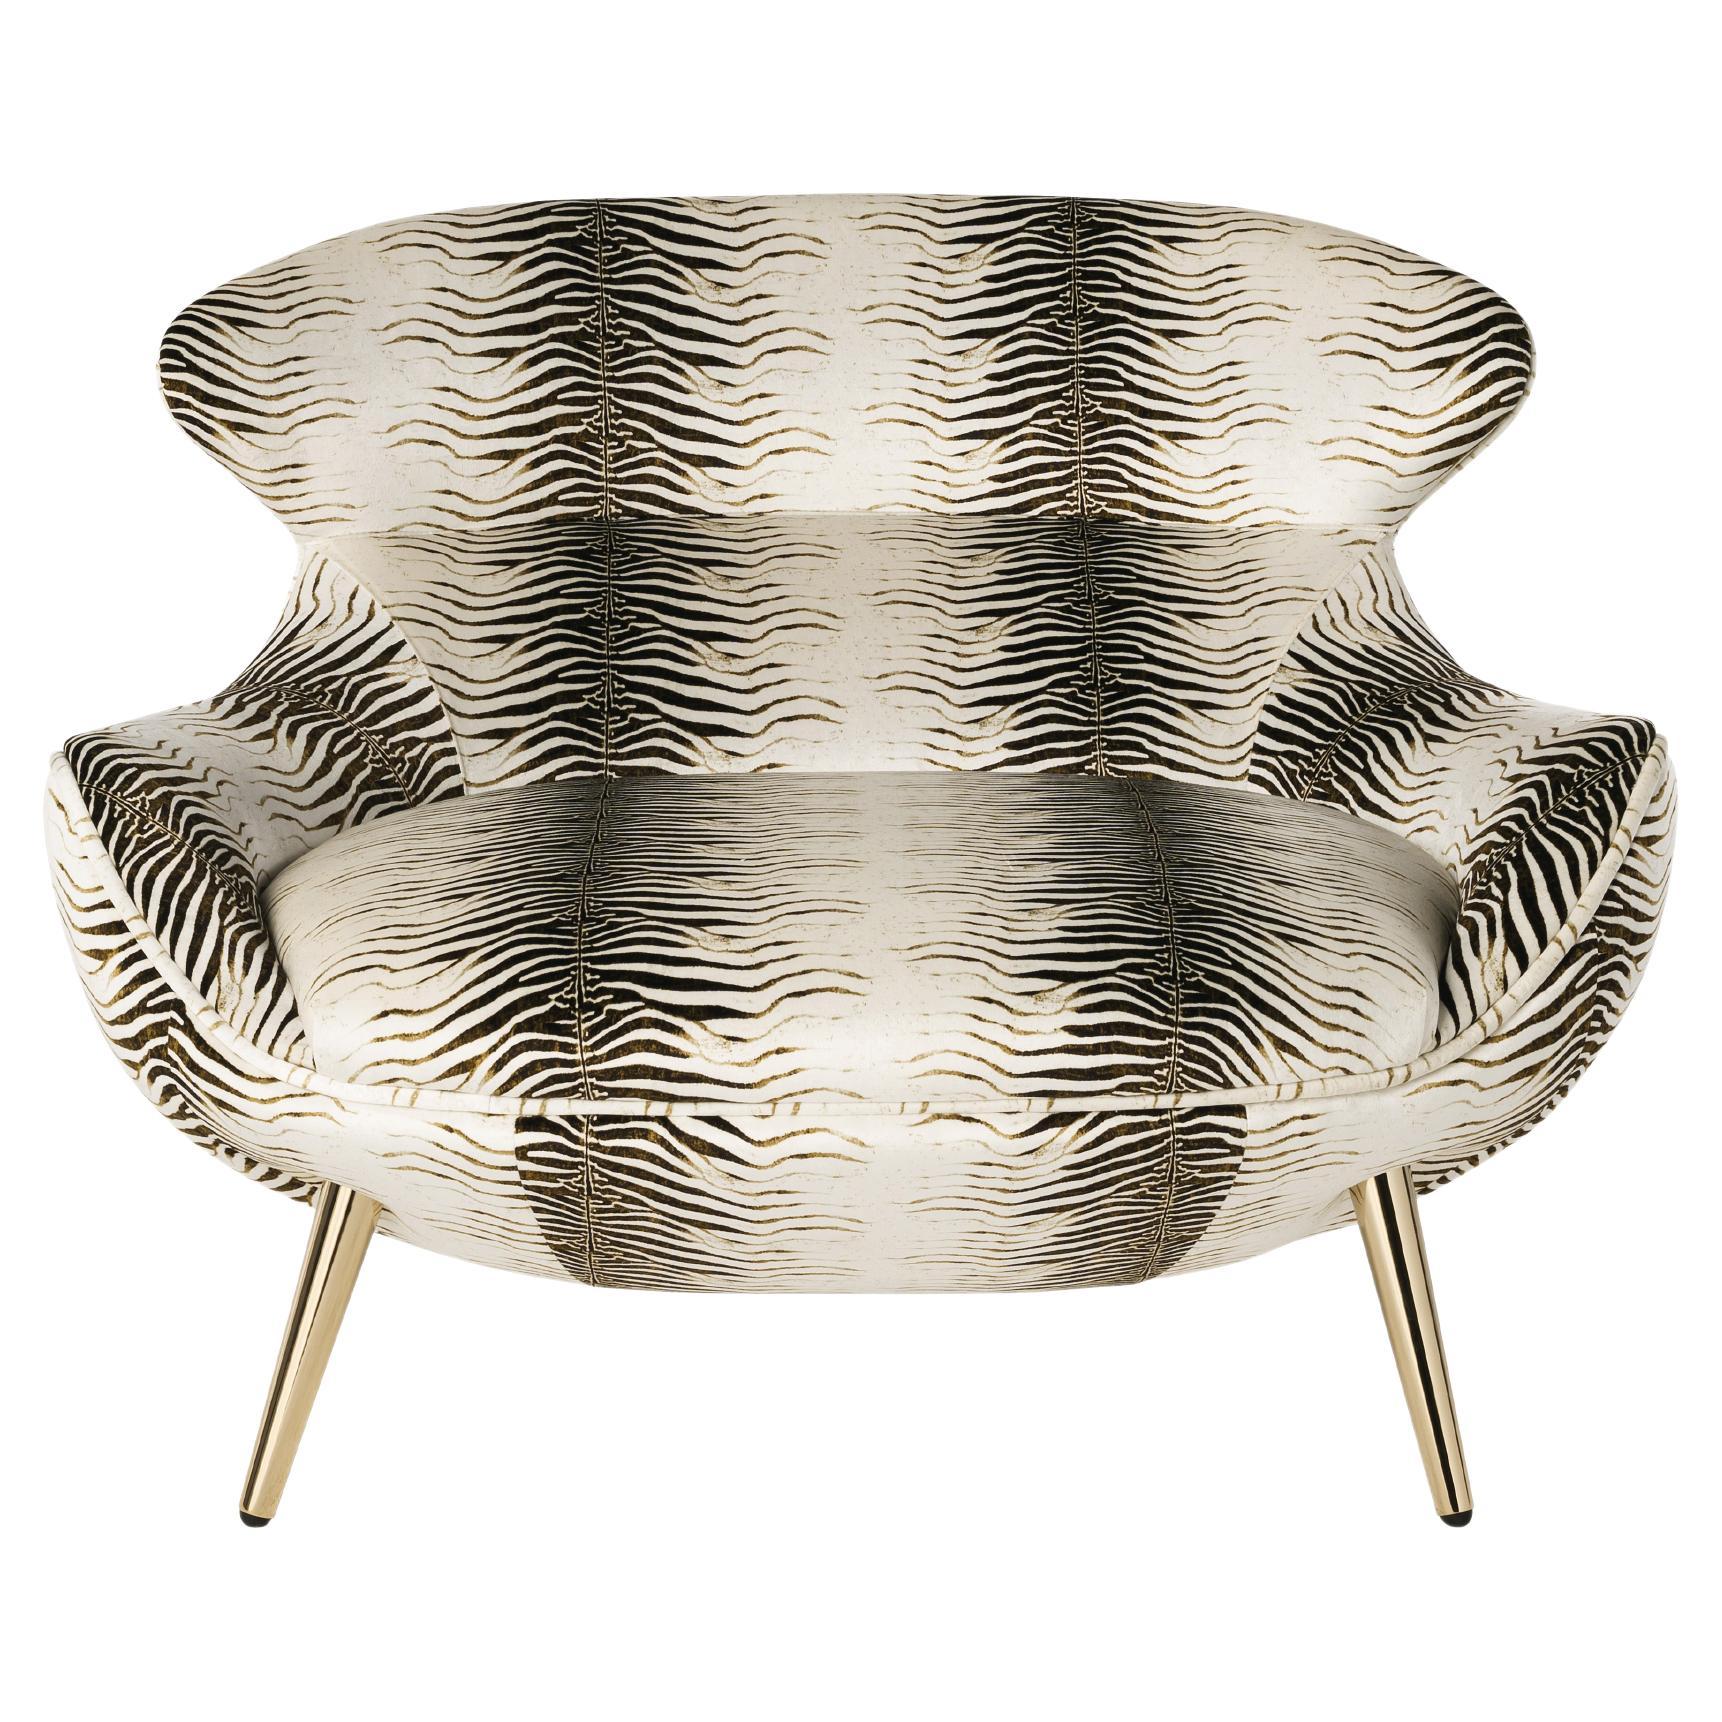 21st Century Curacao Armchair in Fabric by Roberto Cavalli Home Interiors For Sale